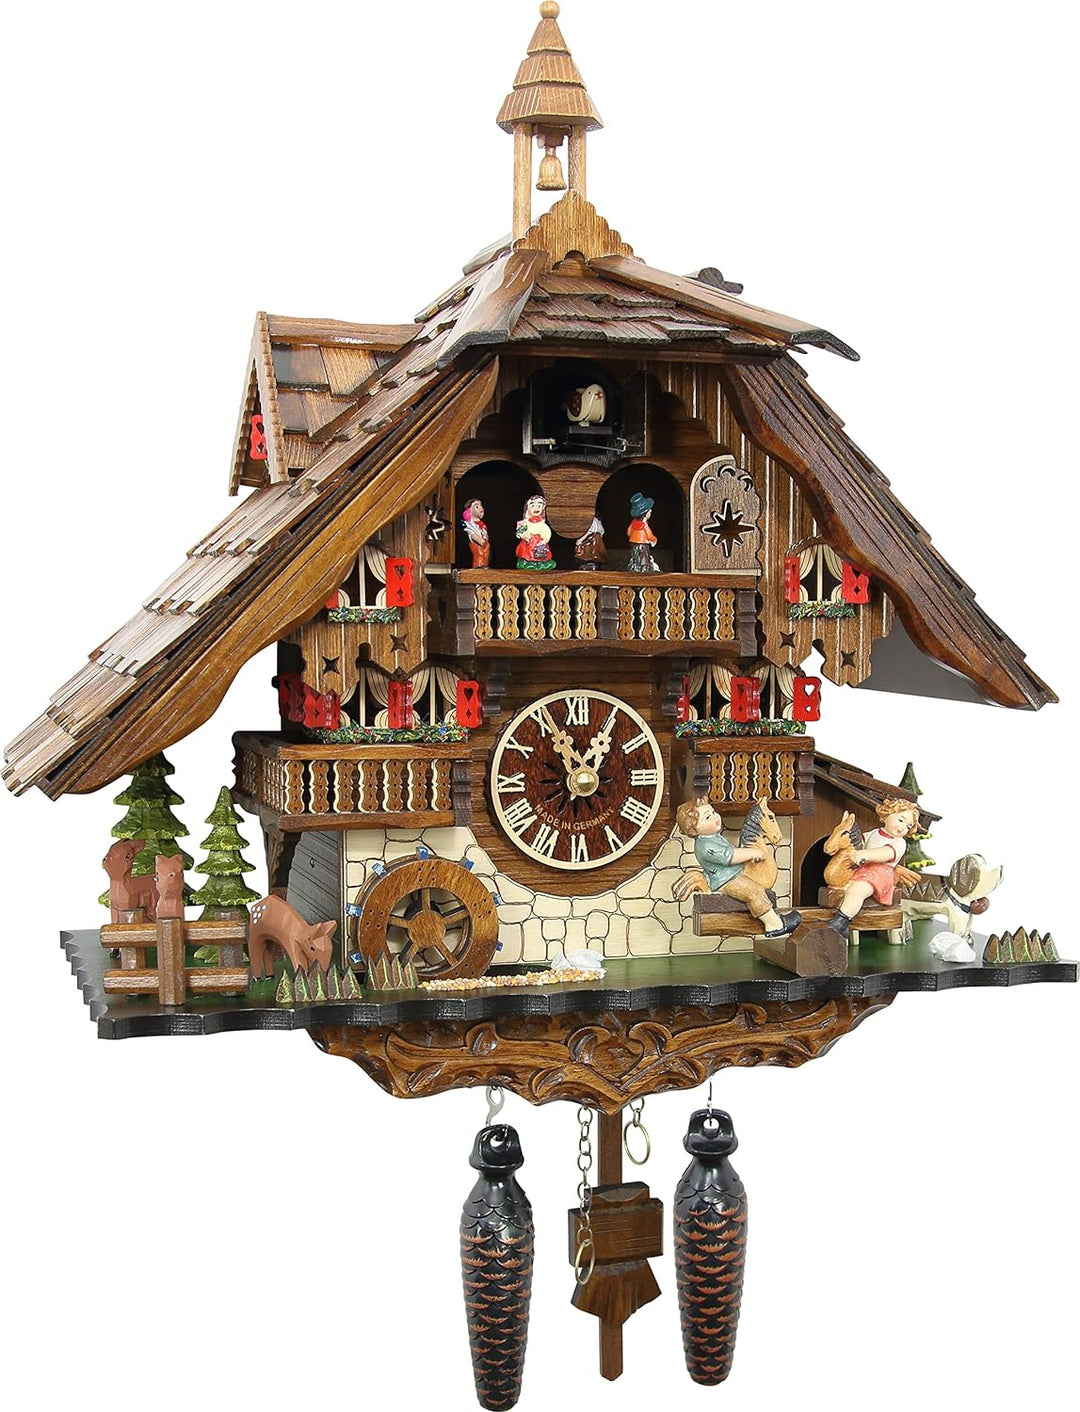 Large German Cuckoo Clock - the Seesaw Mill Chalet with Quartz Movement with Moving Seesaw - Black Forest Clock